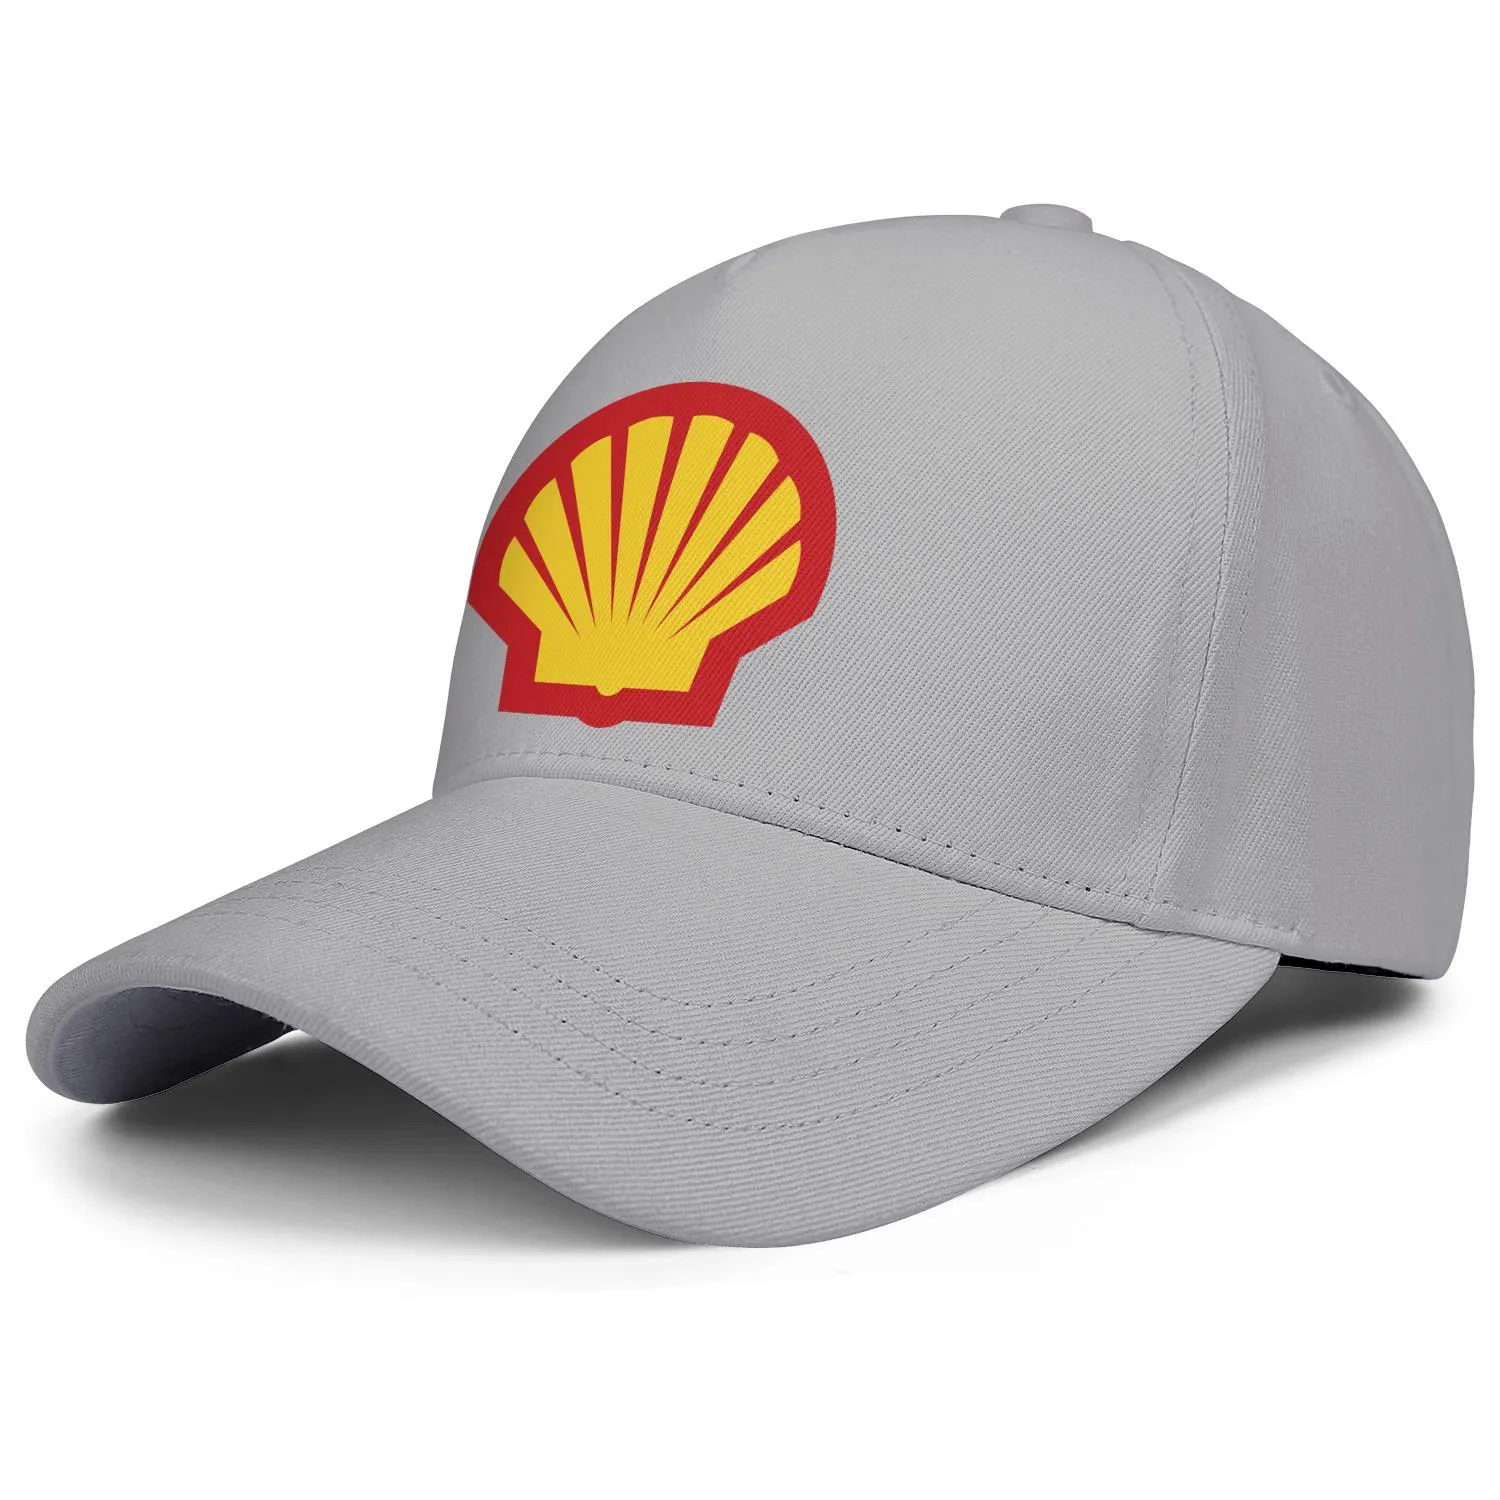 Shell gasoline gas station logo mens and women adjustable trucker cap fitted vintage cute baseballhats locator Gasoline symbo4824587